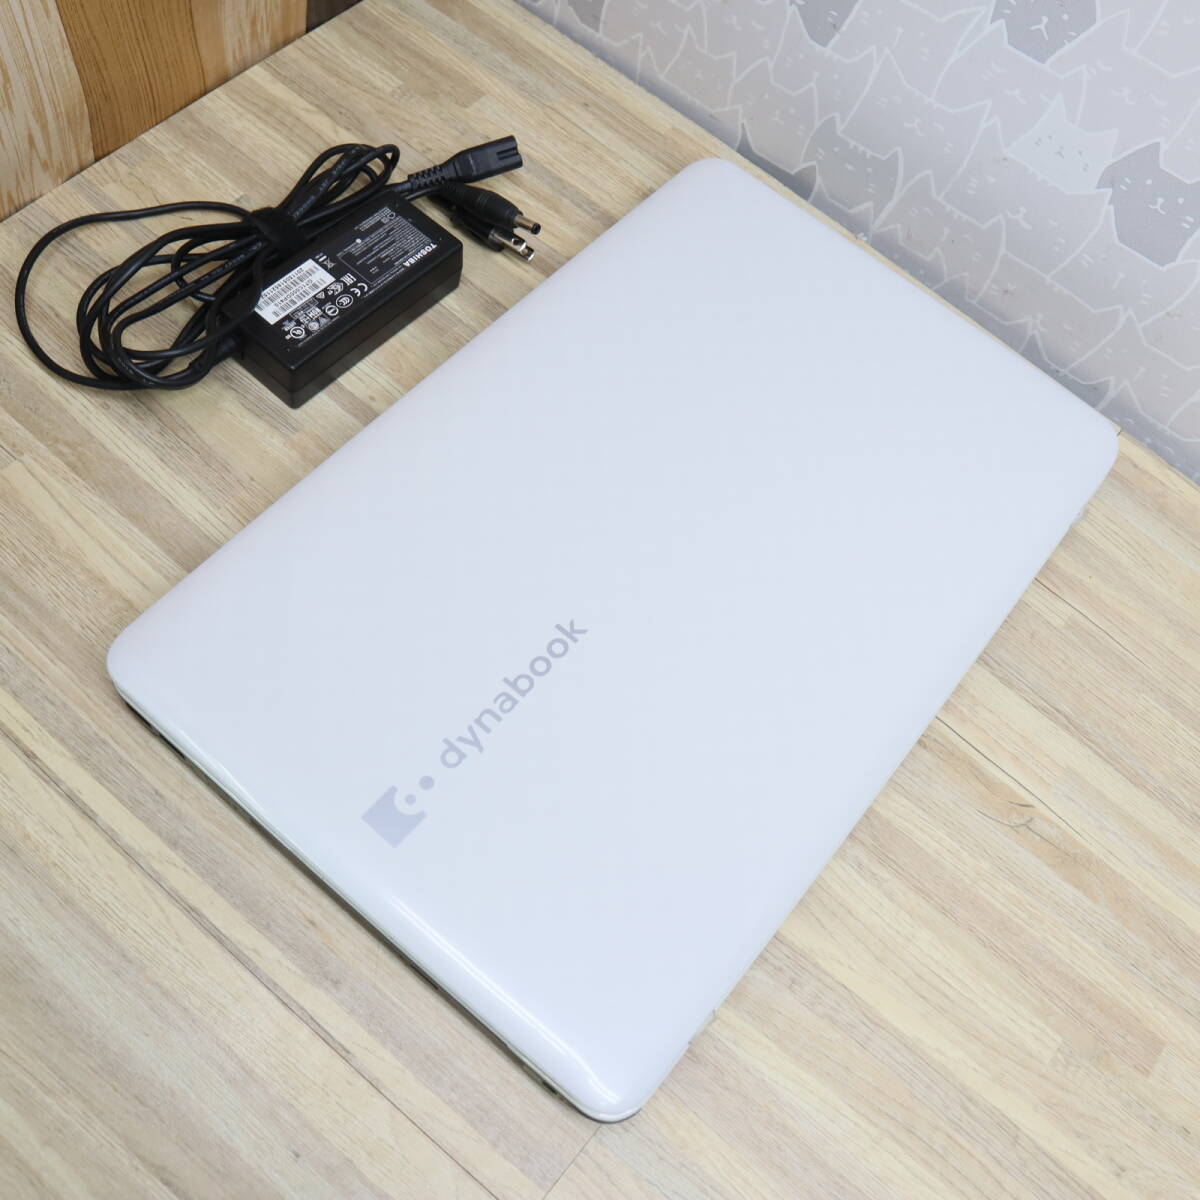 * beautiful goods height performance i5! new goods SSD256GB memory 16GB*T451 Core i5-2450M Web camera Win11 MS Office2019 Home&Business secondhand goods Note PC*P70948